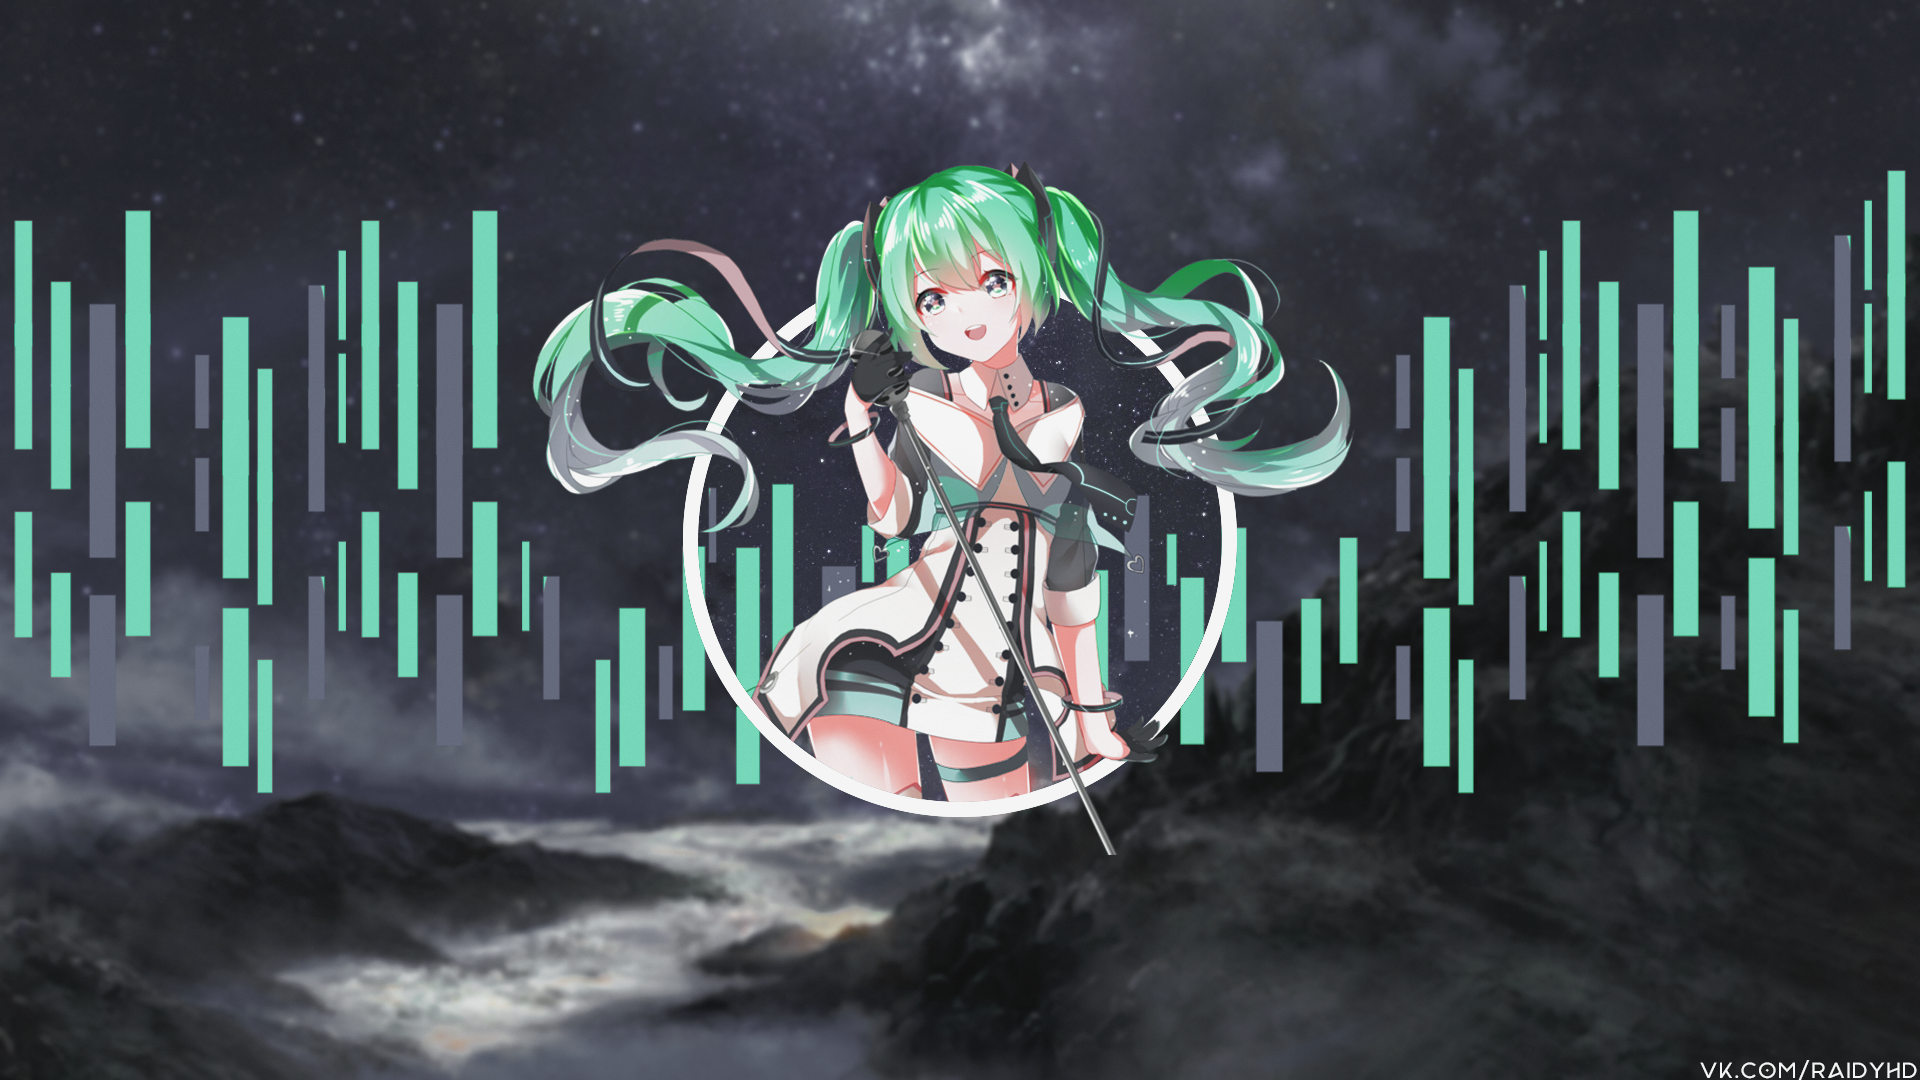 Anime 1920x1080 anime anime girls picture-in-picture Hatsune Miku